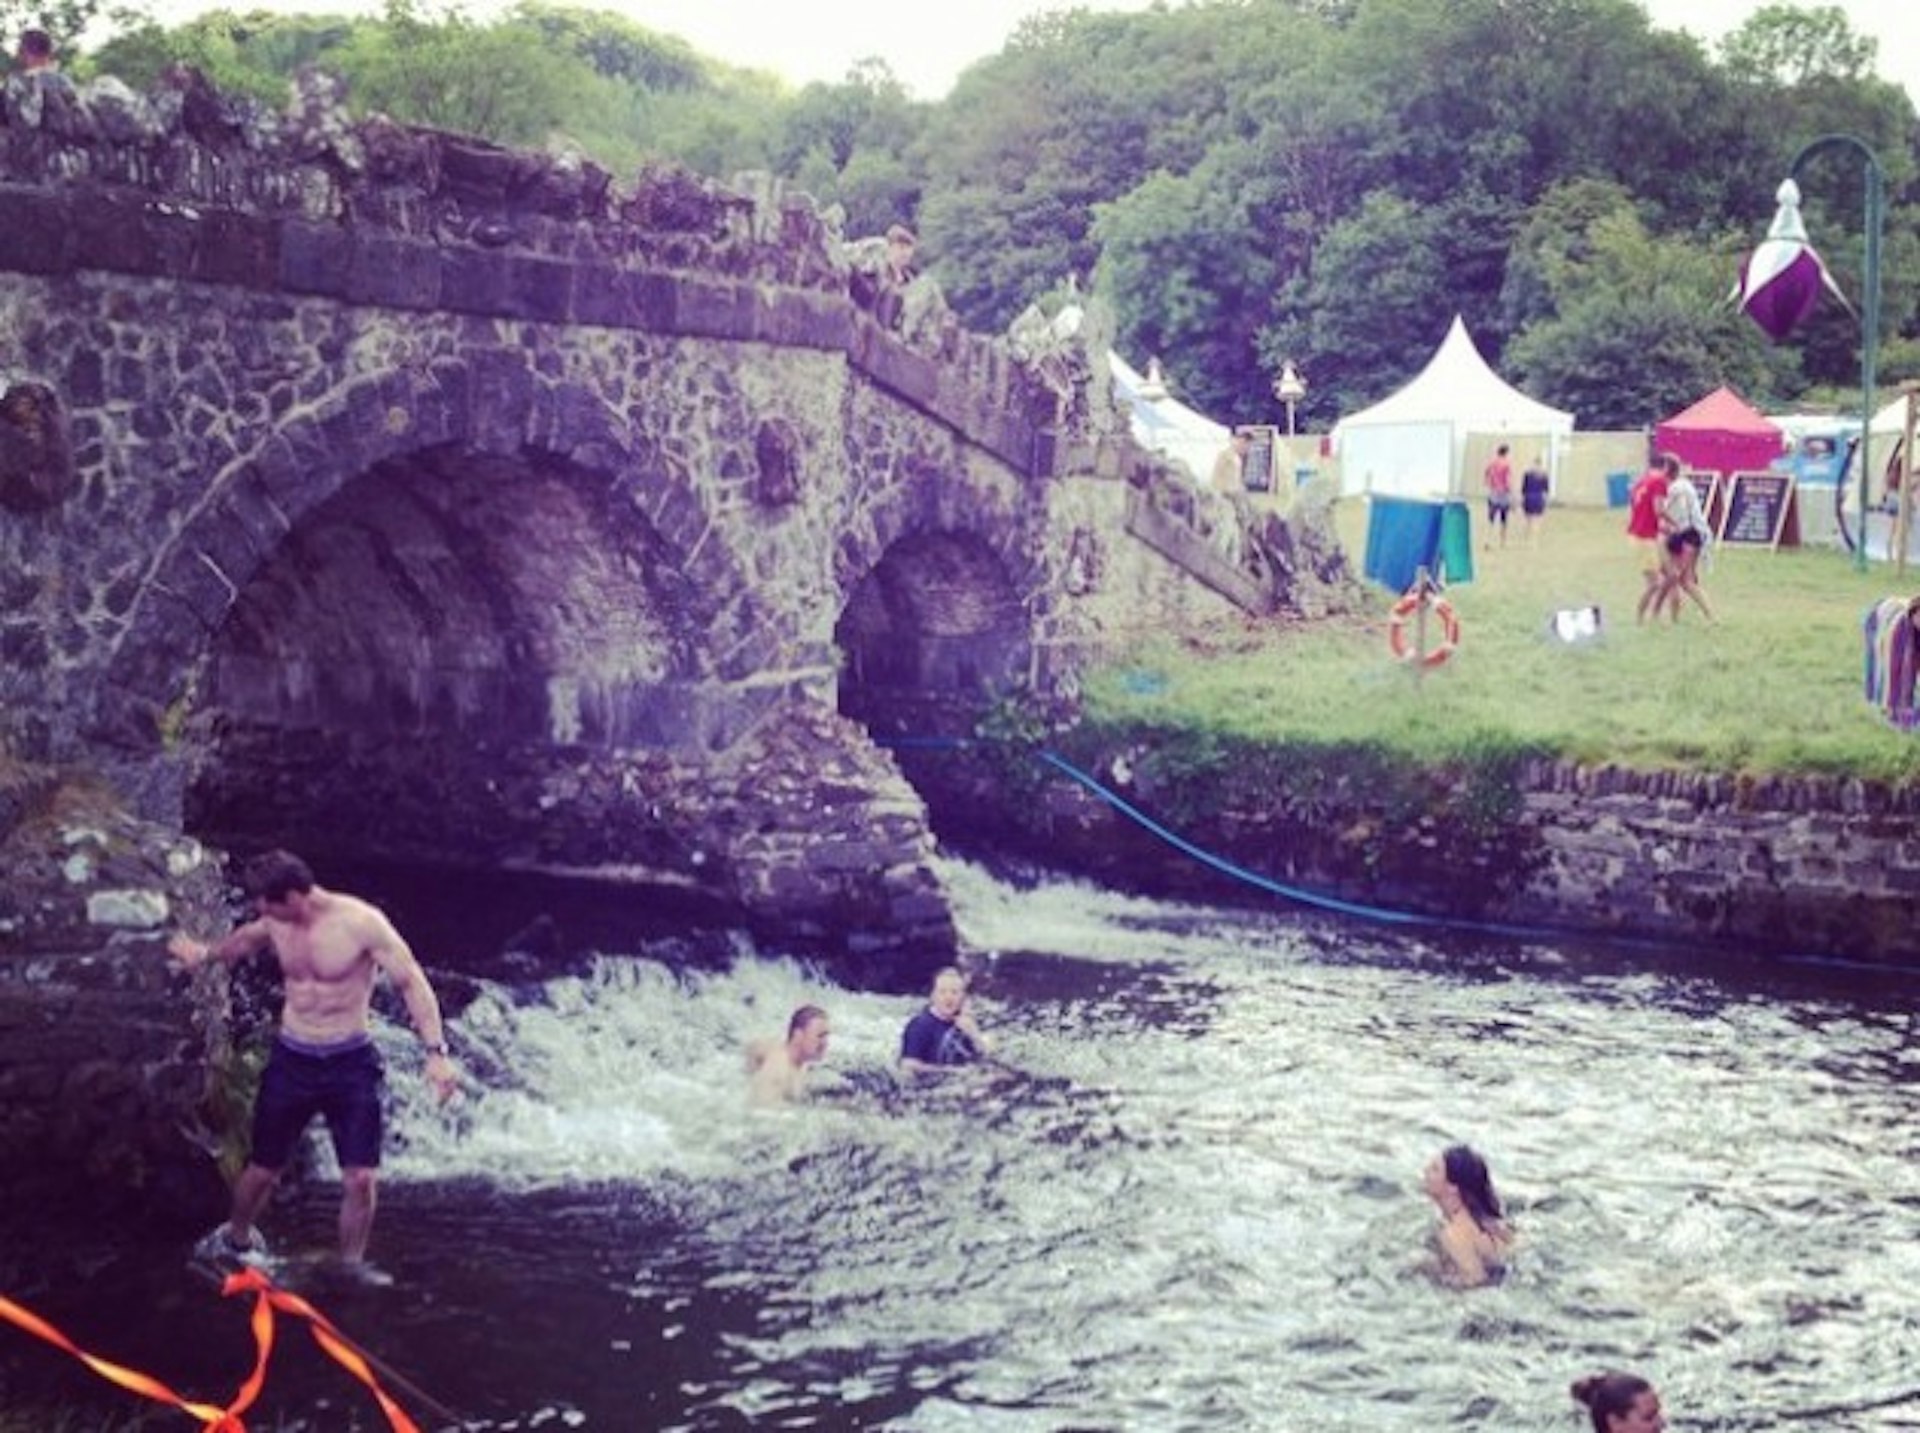 Freshen up with an early morning dip at #somersaultfestival #wildswimming